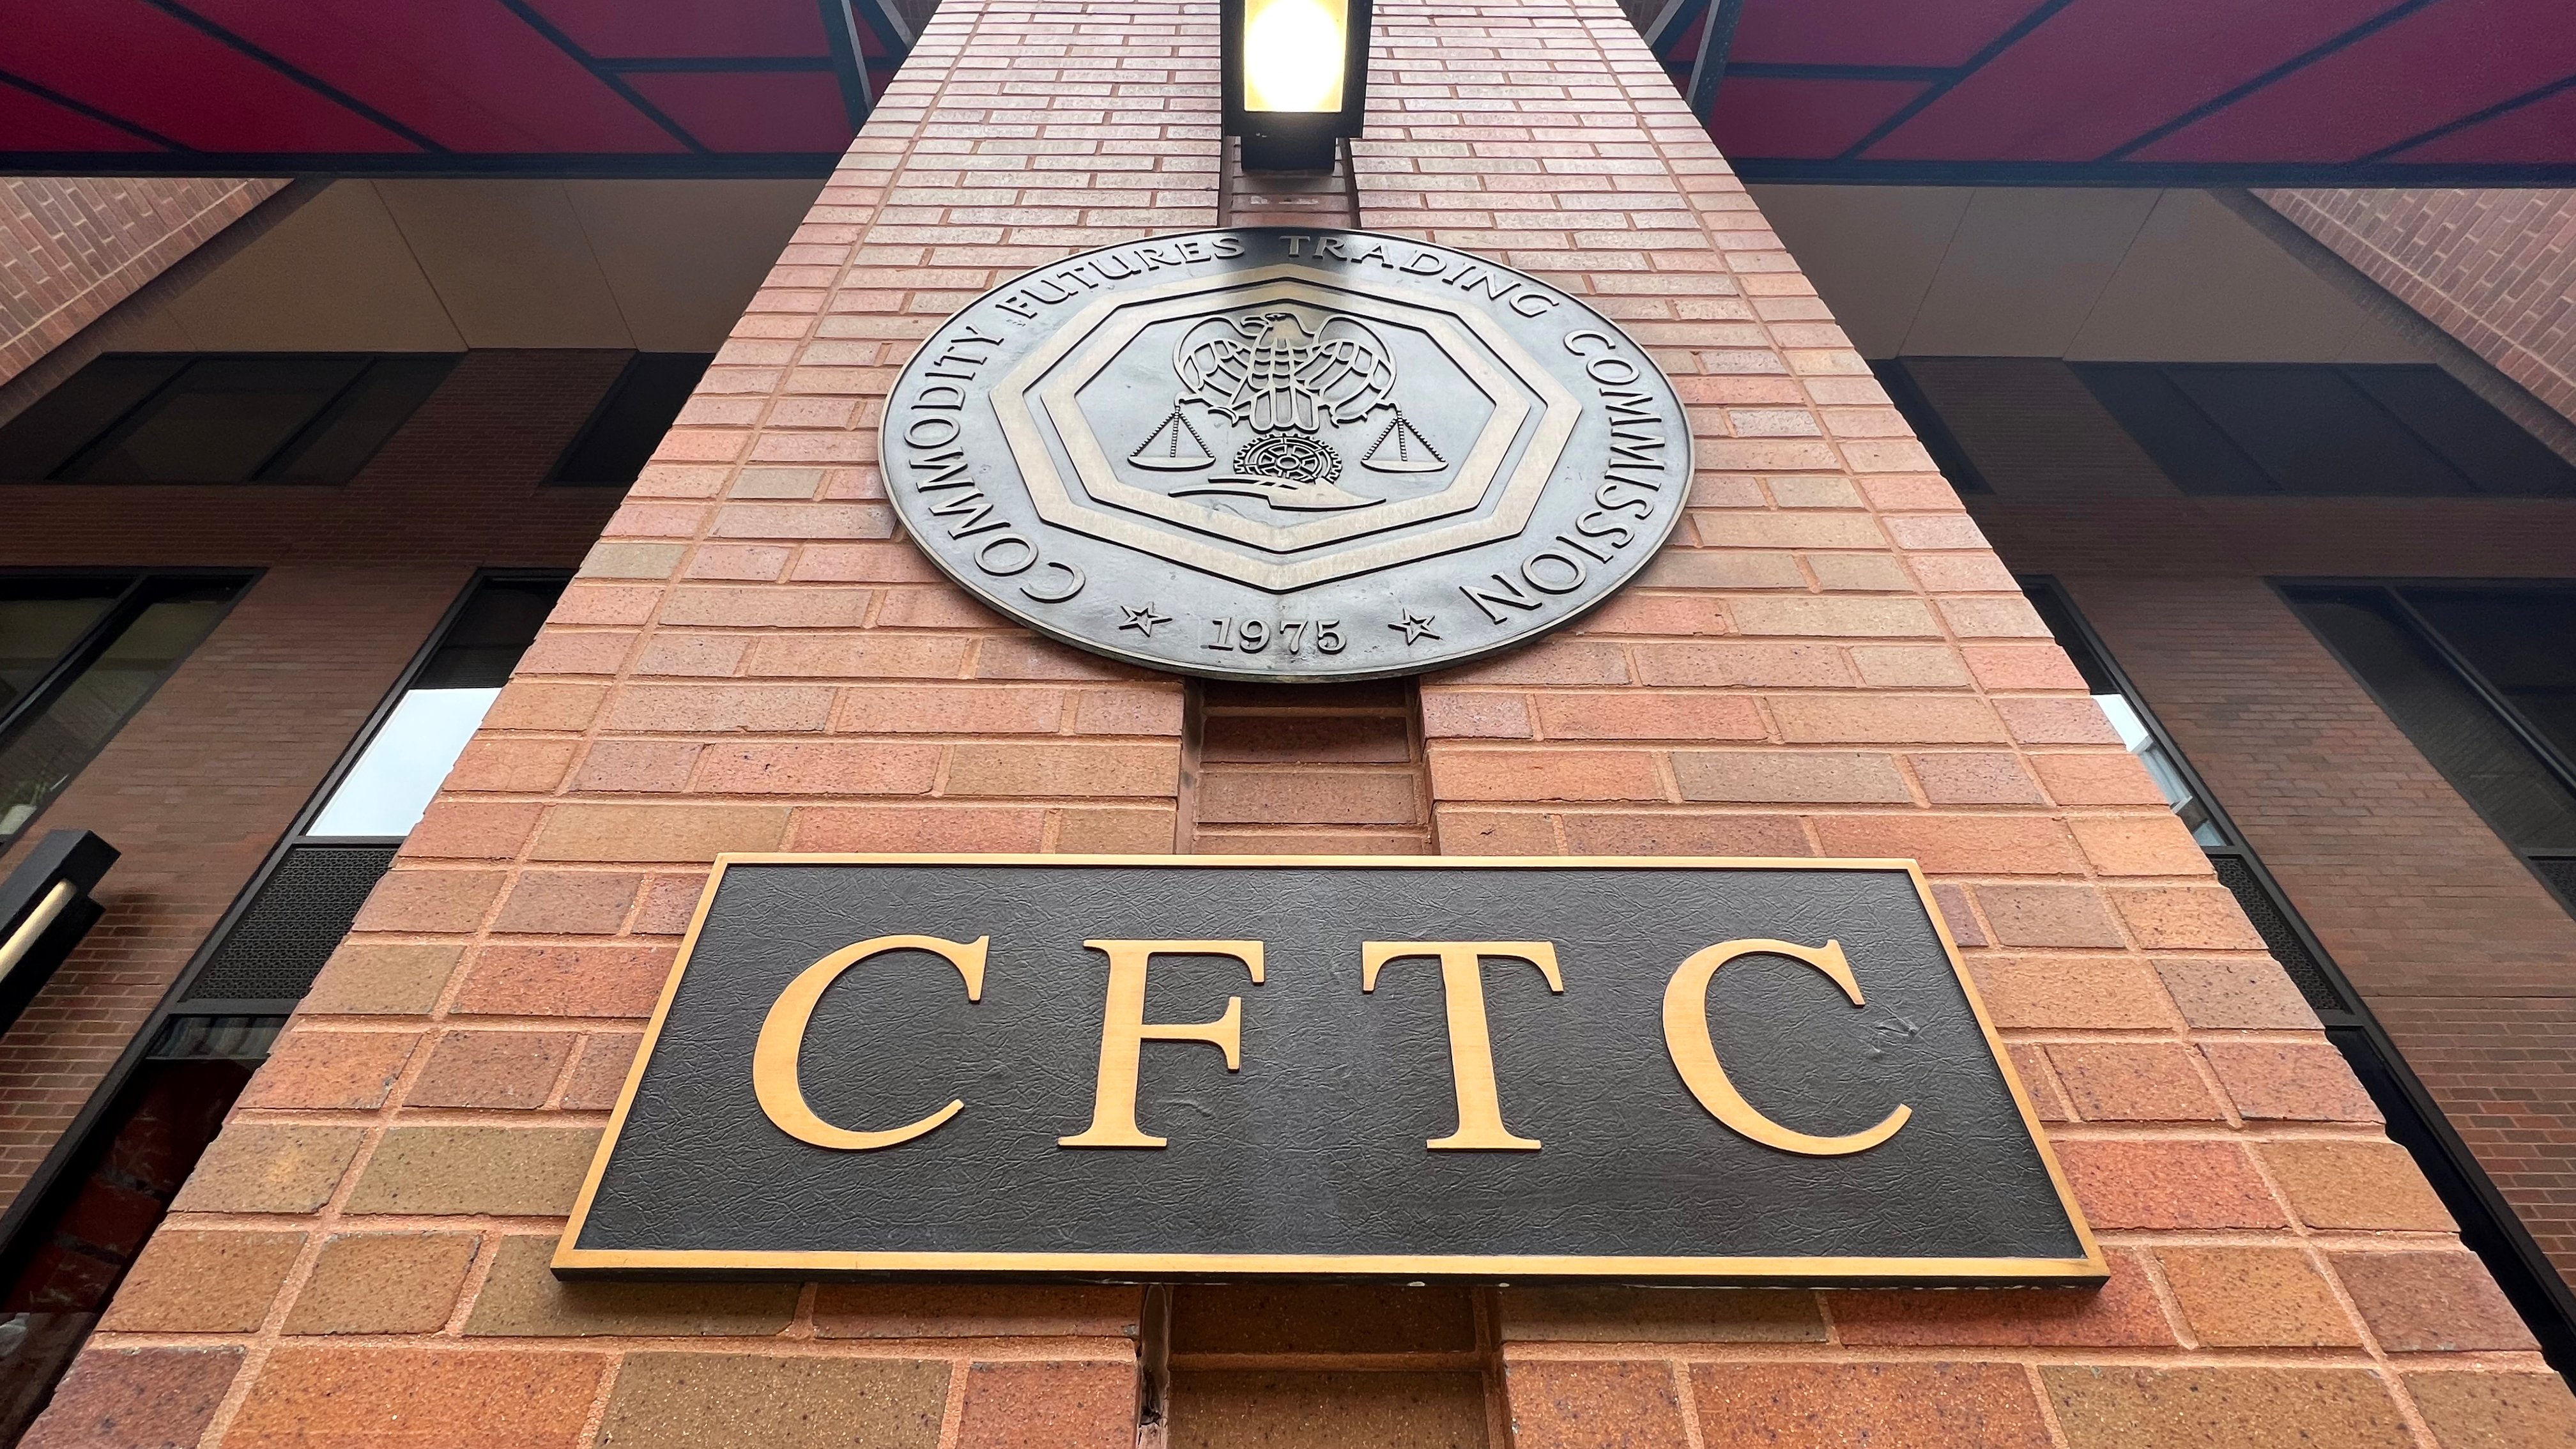 CFTC Enforcement Advisory on Penalties, Monitors and Admissions